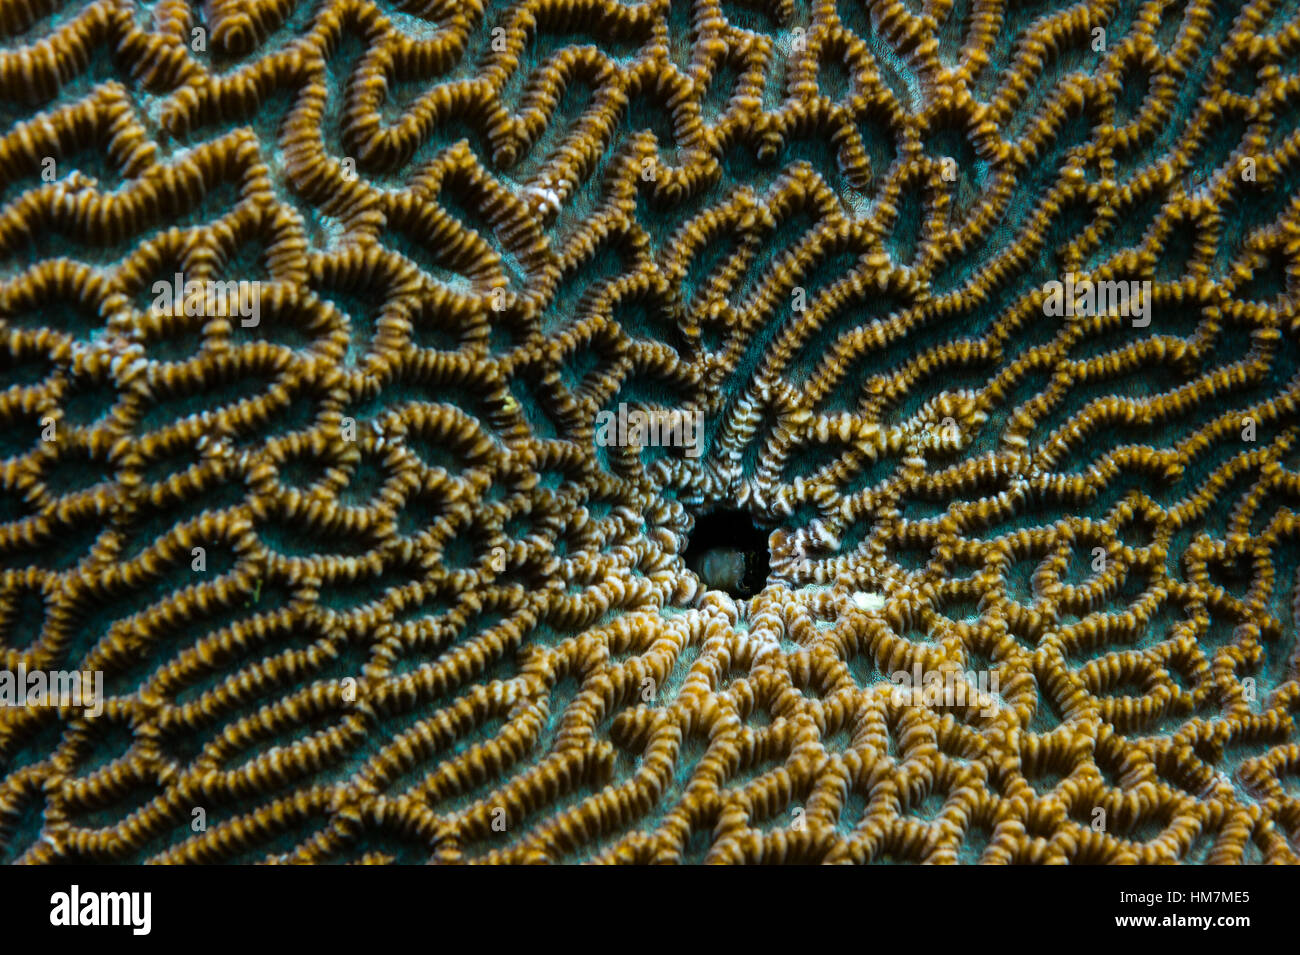 A Blennie resting in the textured centre of a hard coral. Stock Photo